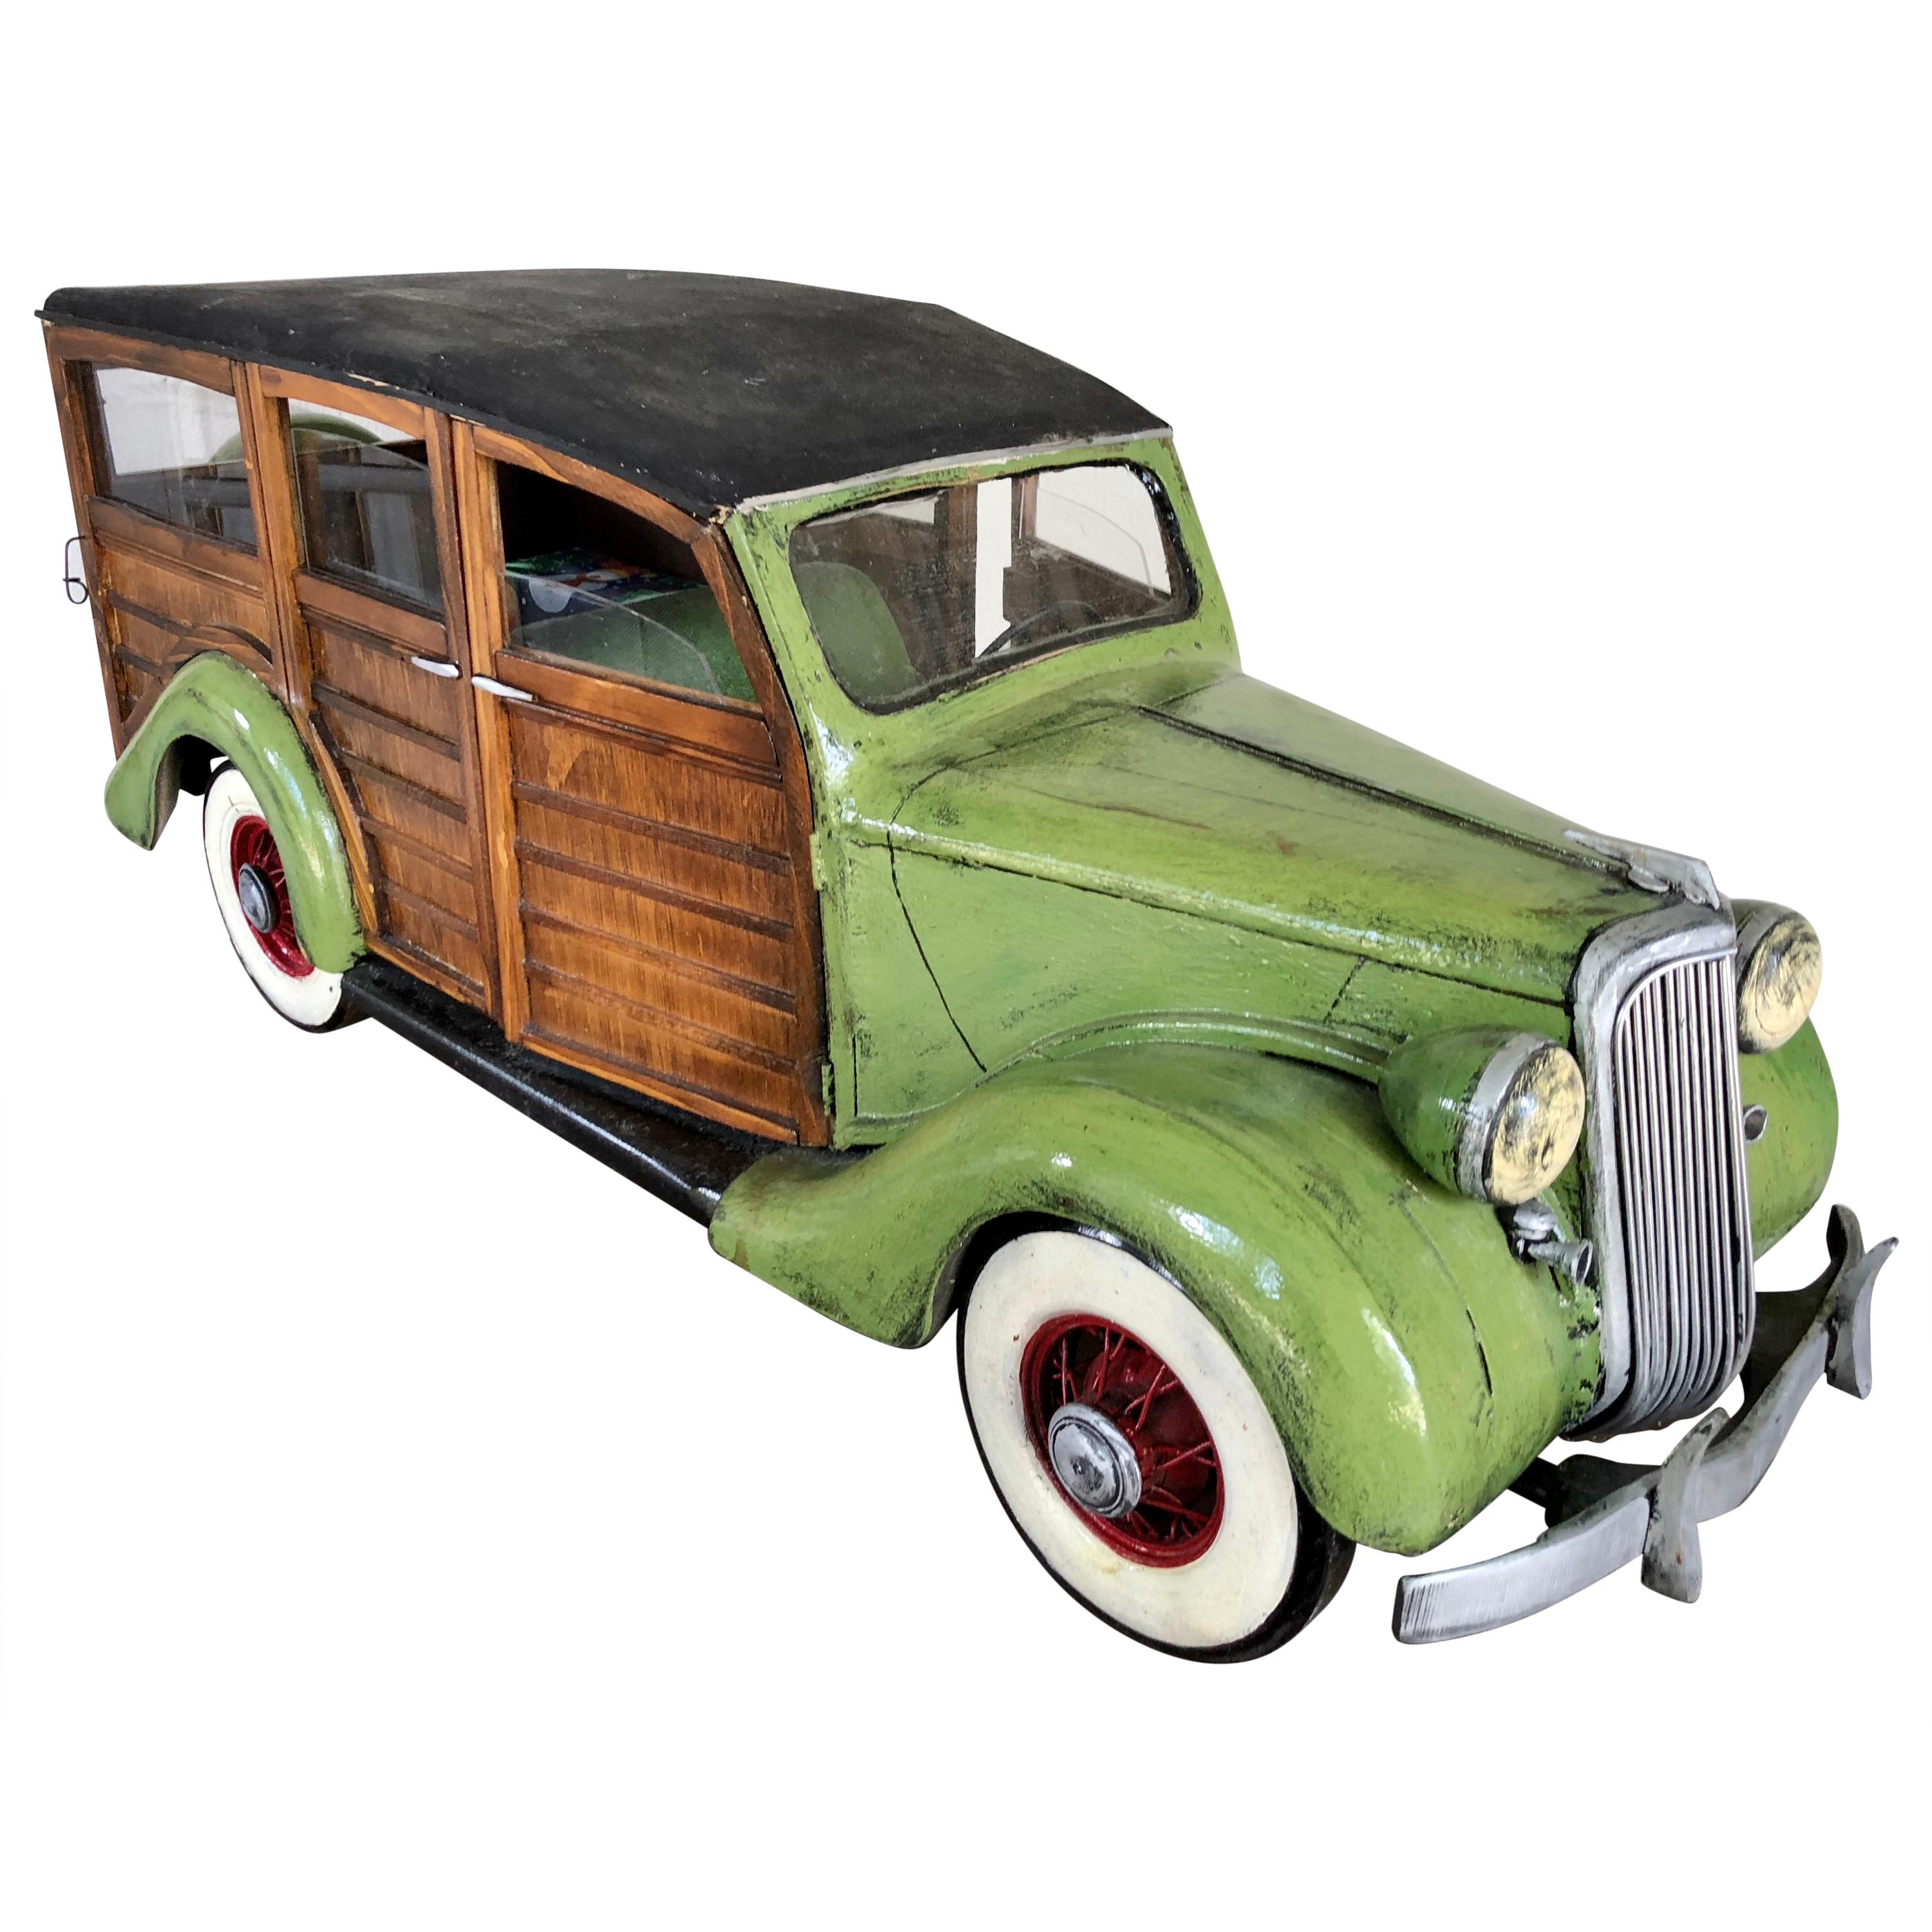 "Green Woodie Wagon" Sculpture by Paul Jacobsen